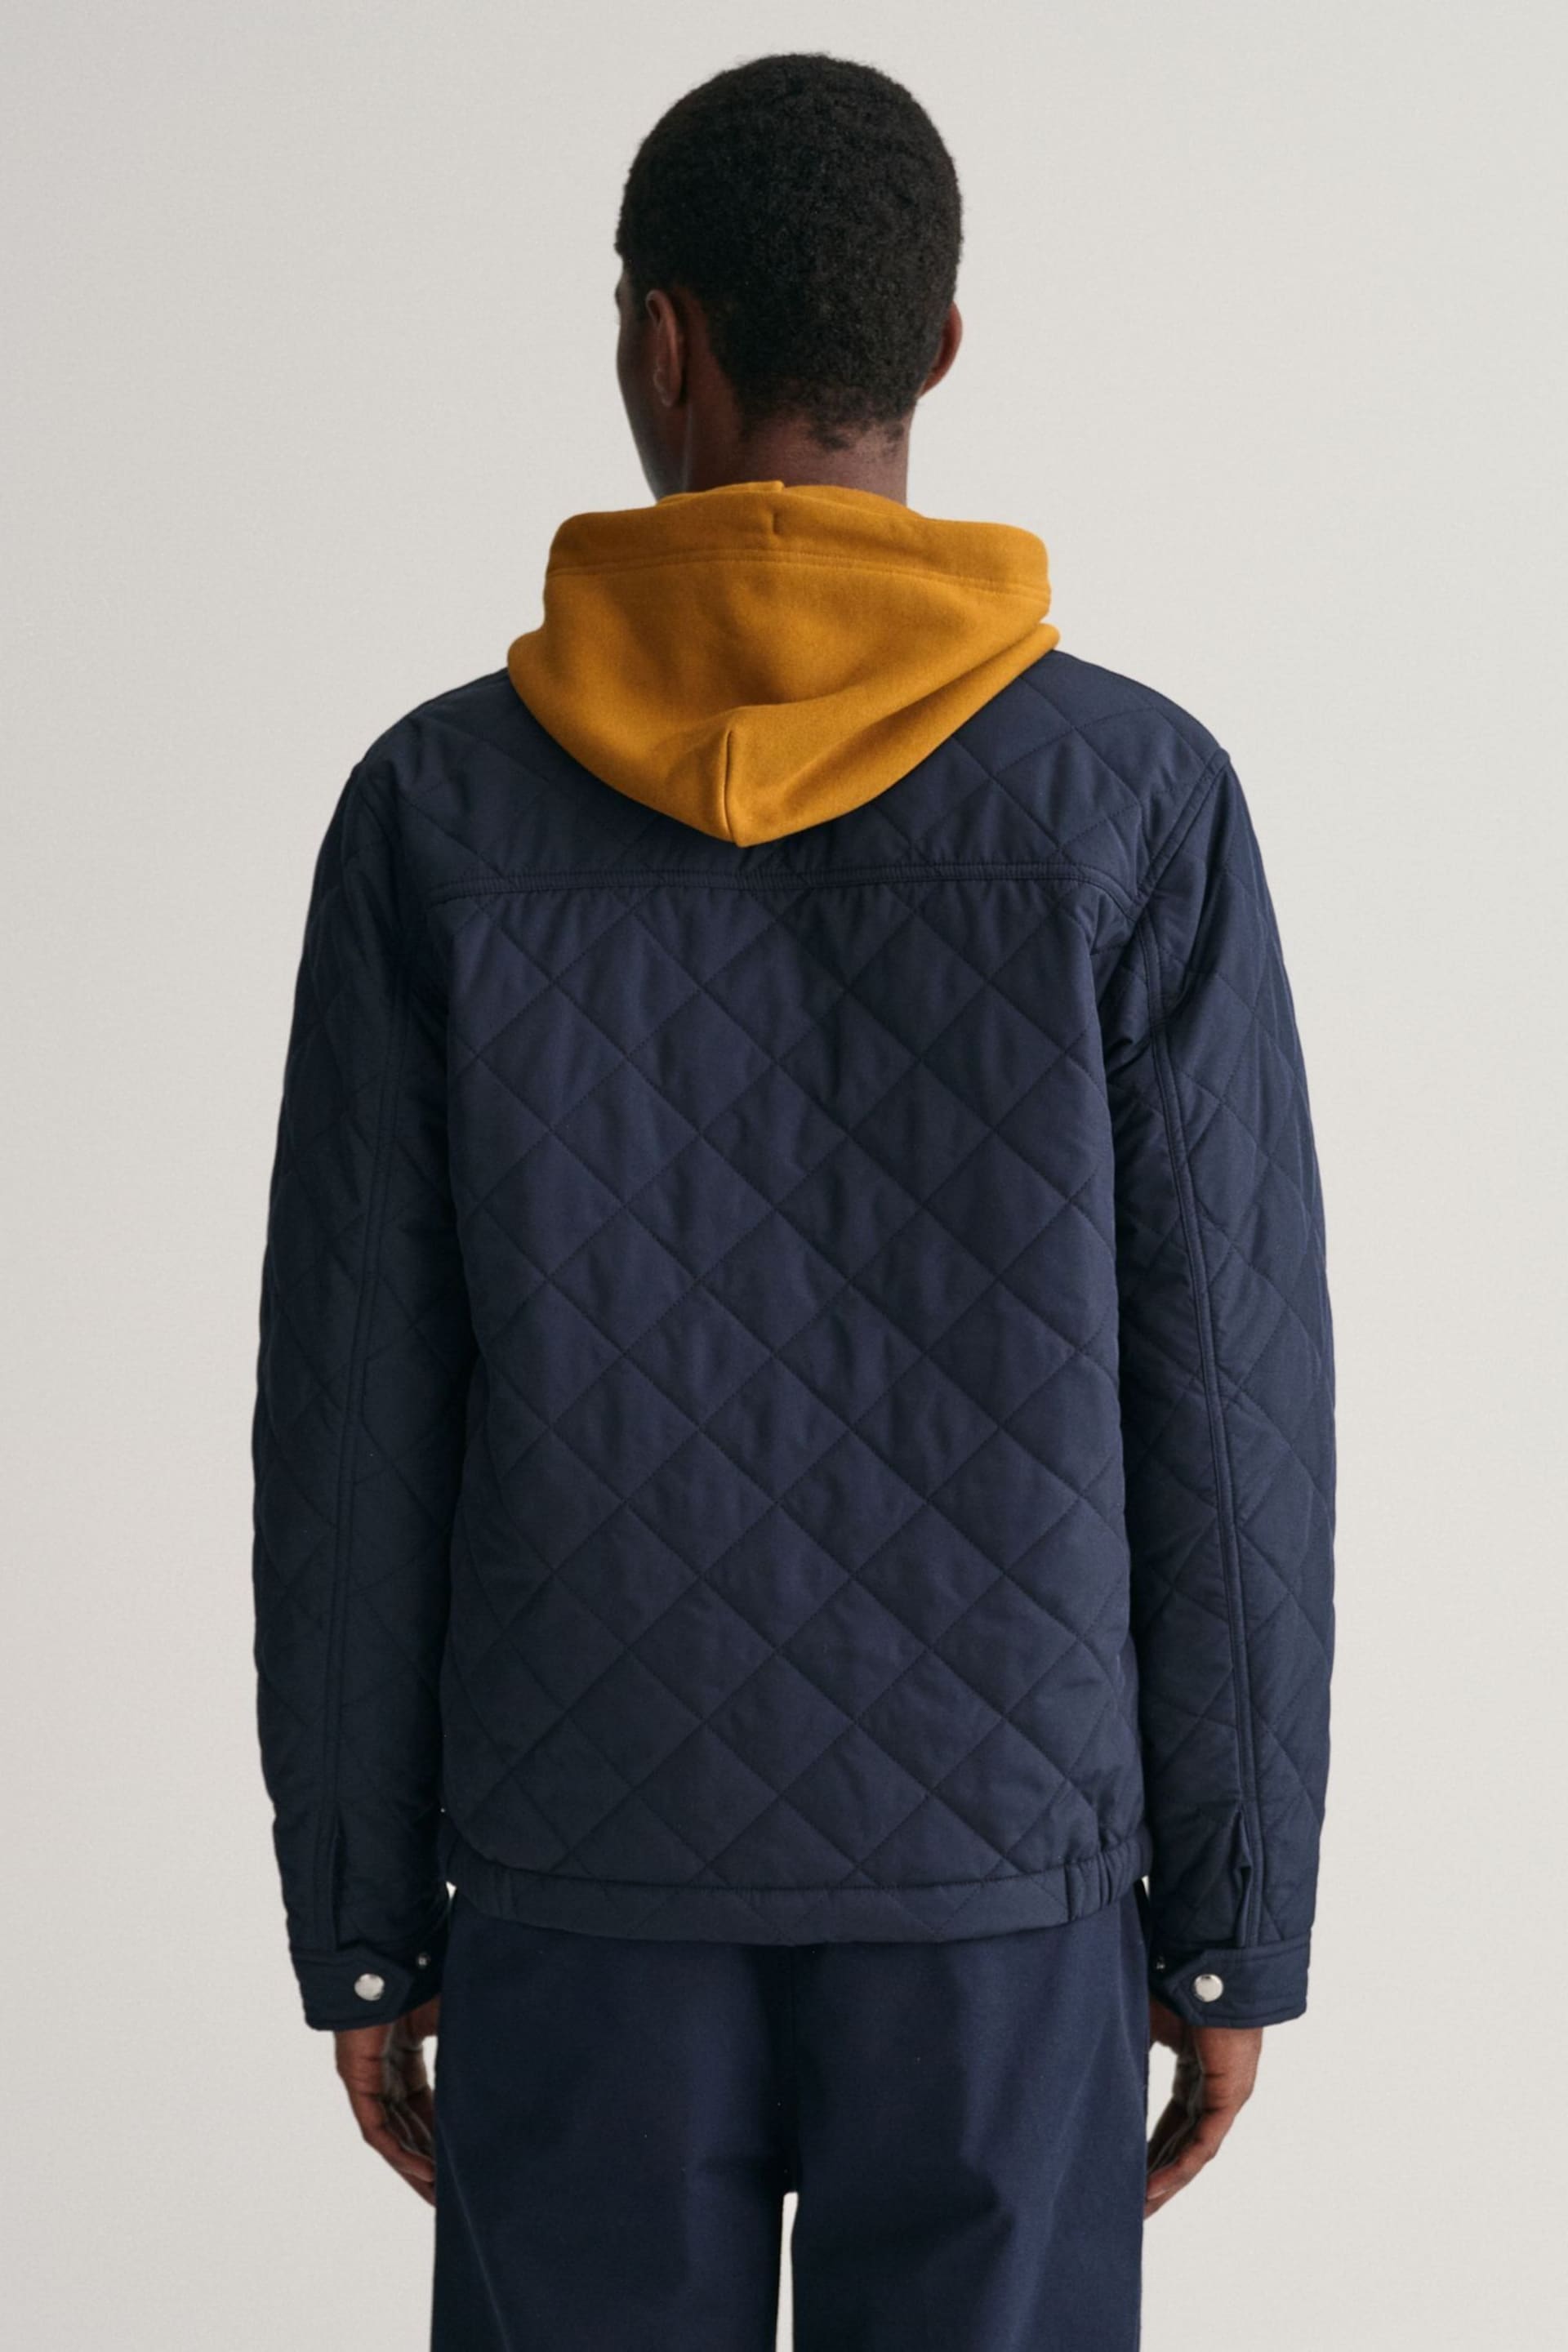 GANT Quilted Windcheater Jacket - Image 2 of 7